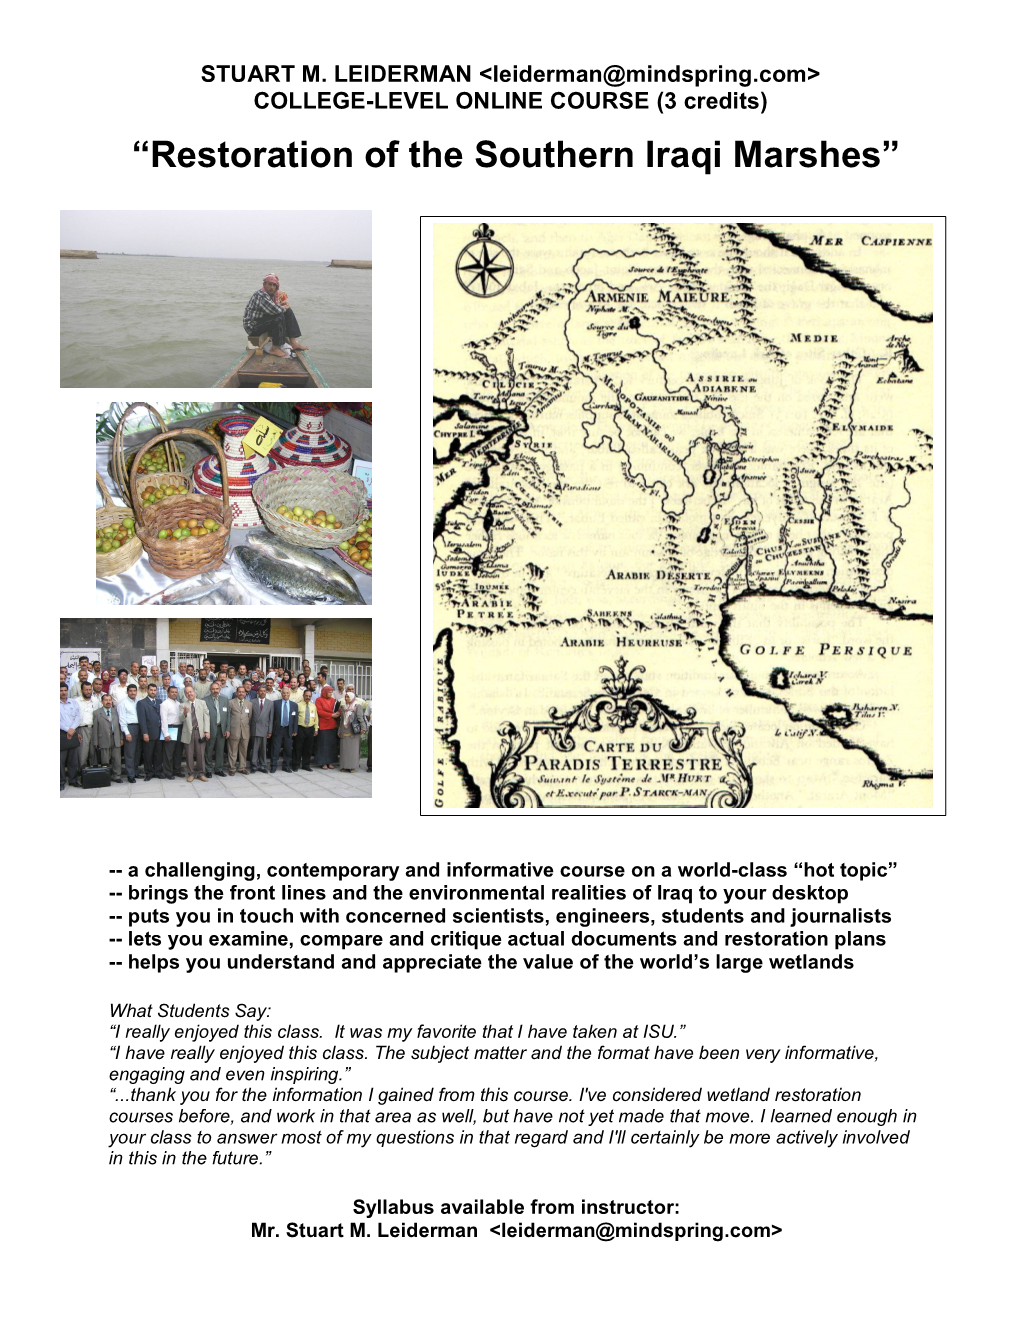 “Restoration of the Southern Iraqi Marshes”